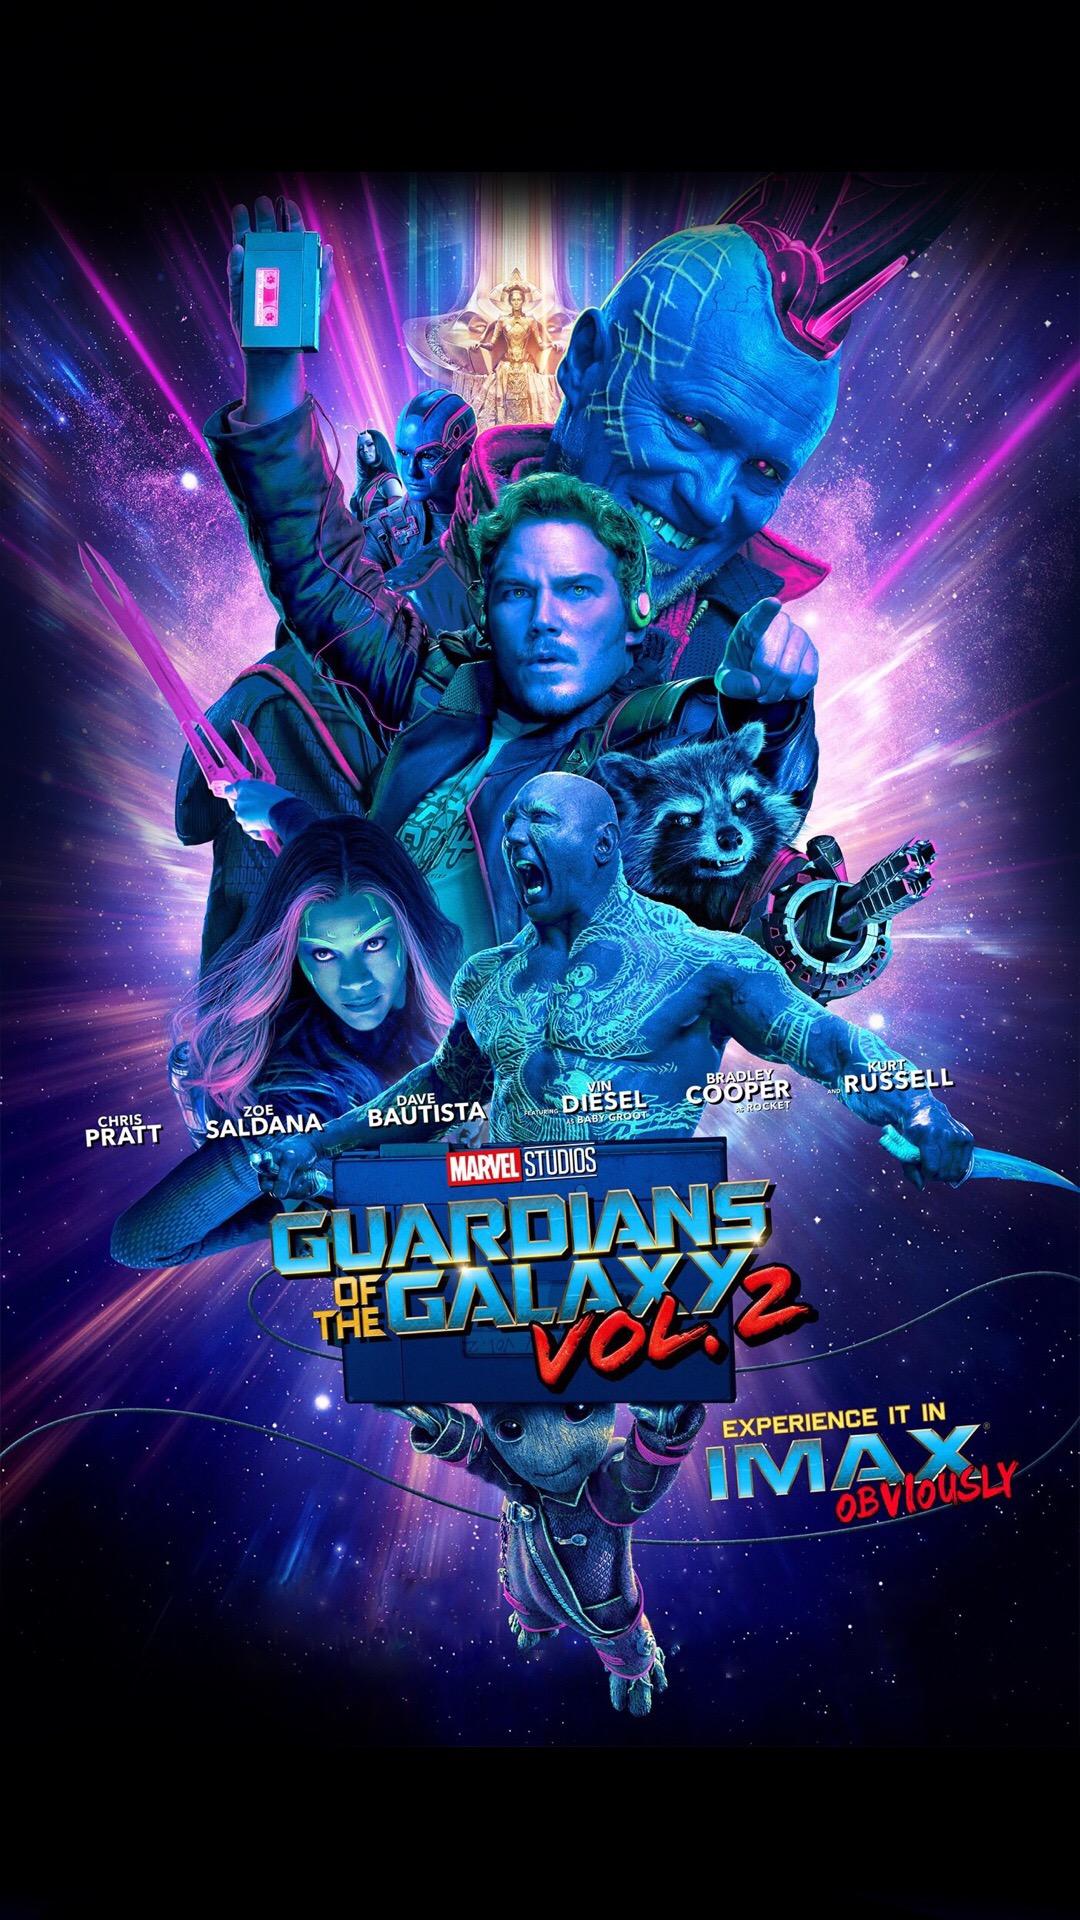 Guardians of the Galaxy Wallpaper Phone. Guardians Galaxy Wallpaper, Guardians of the Galaxy Wallpaper and Rise of the Guardians Wallpaper